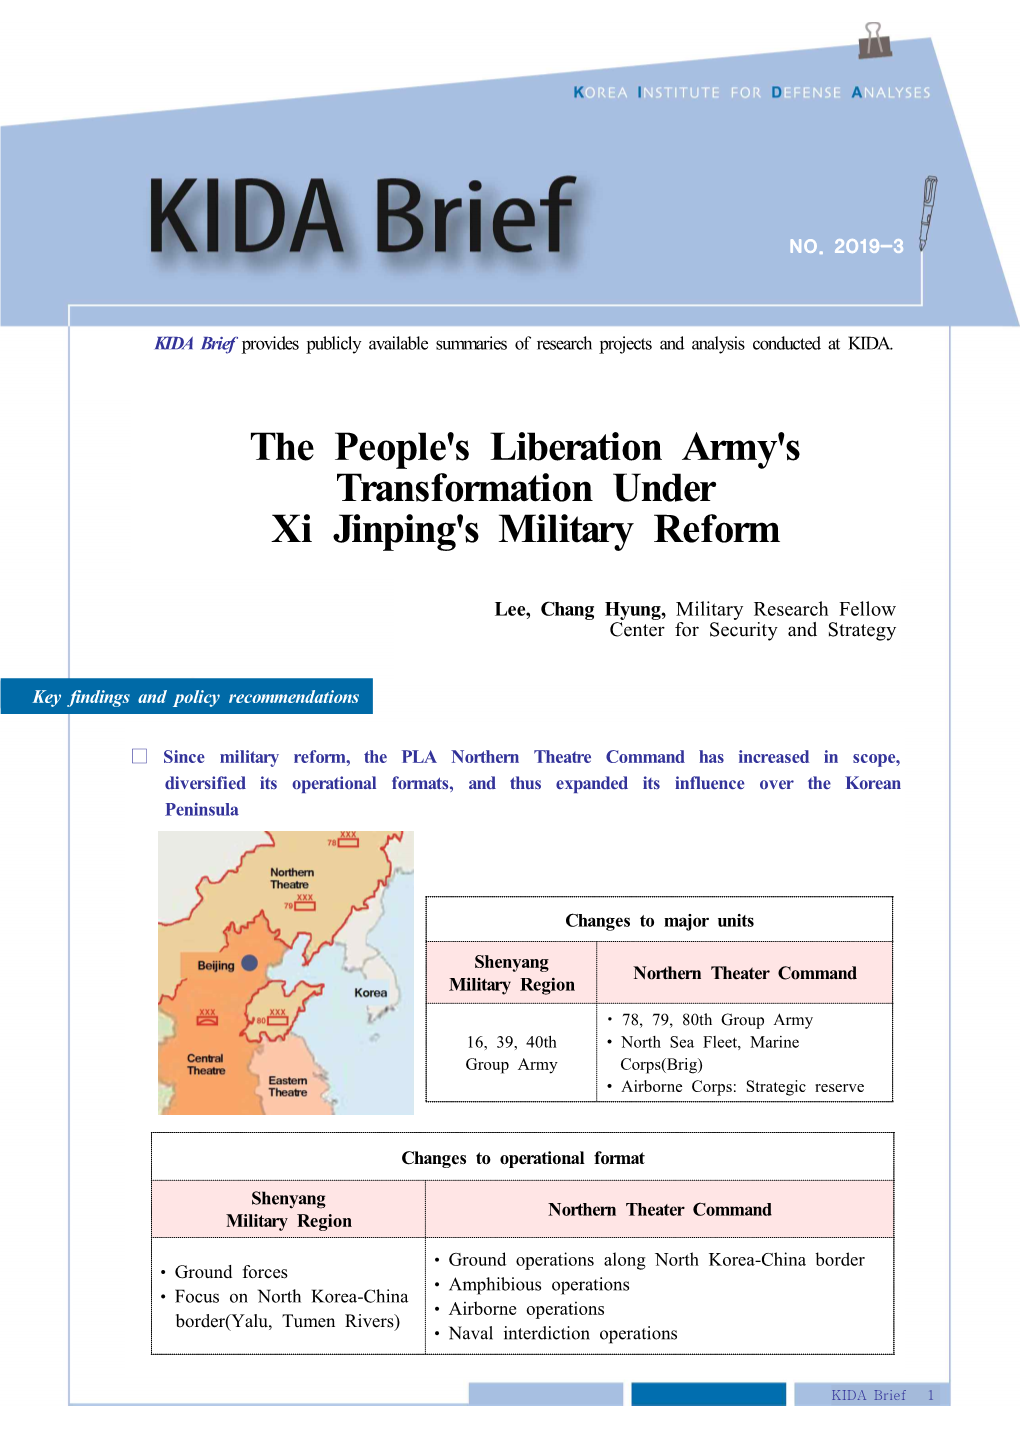 The People's Liberation Army's Transformation Under Xi Jinping's Military Reform